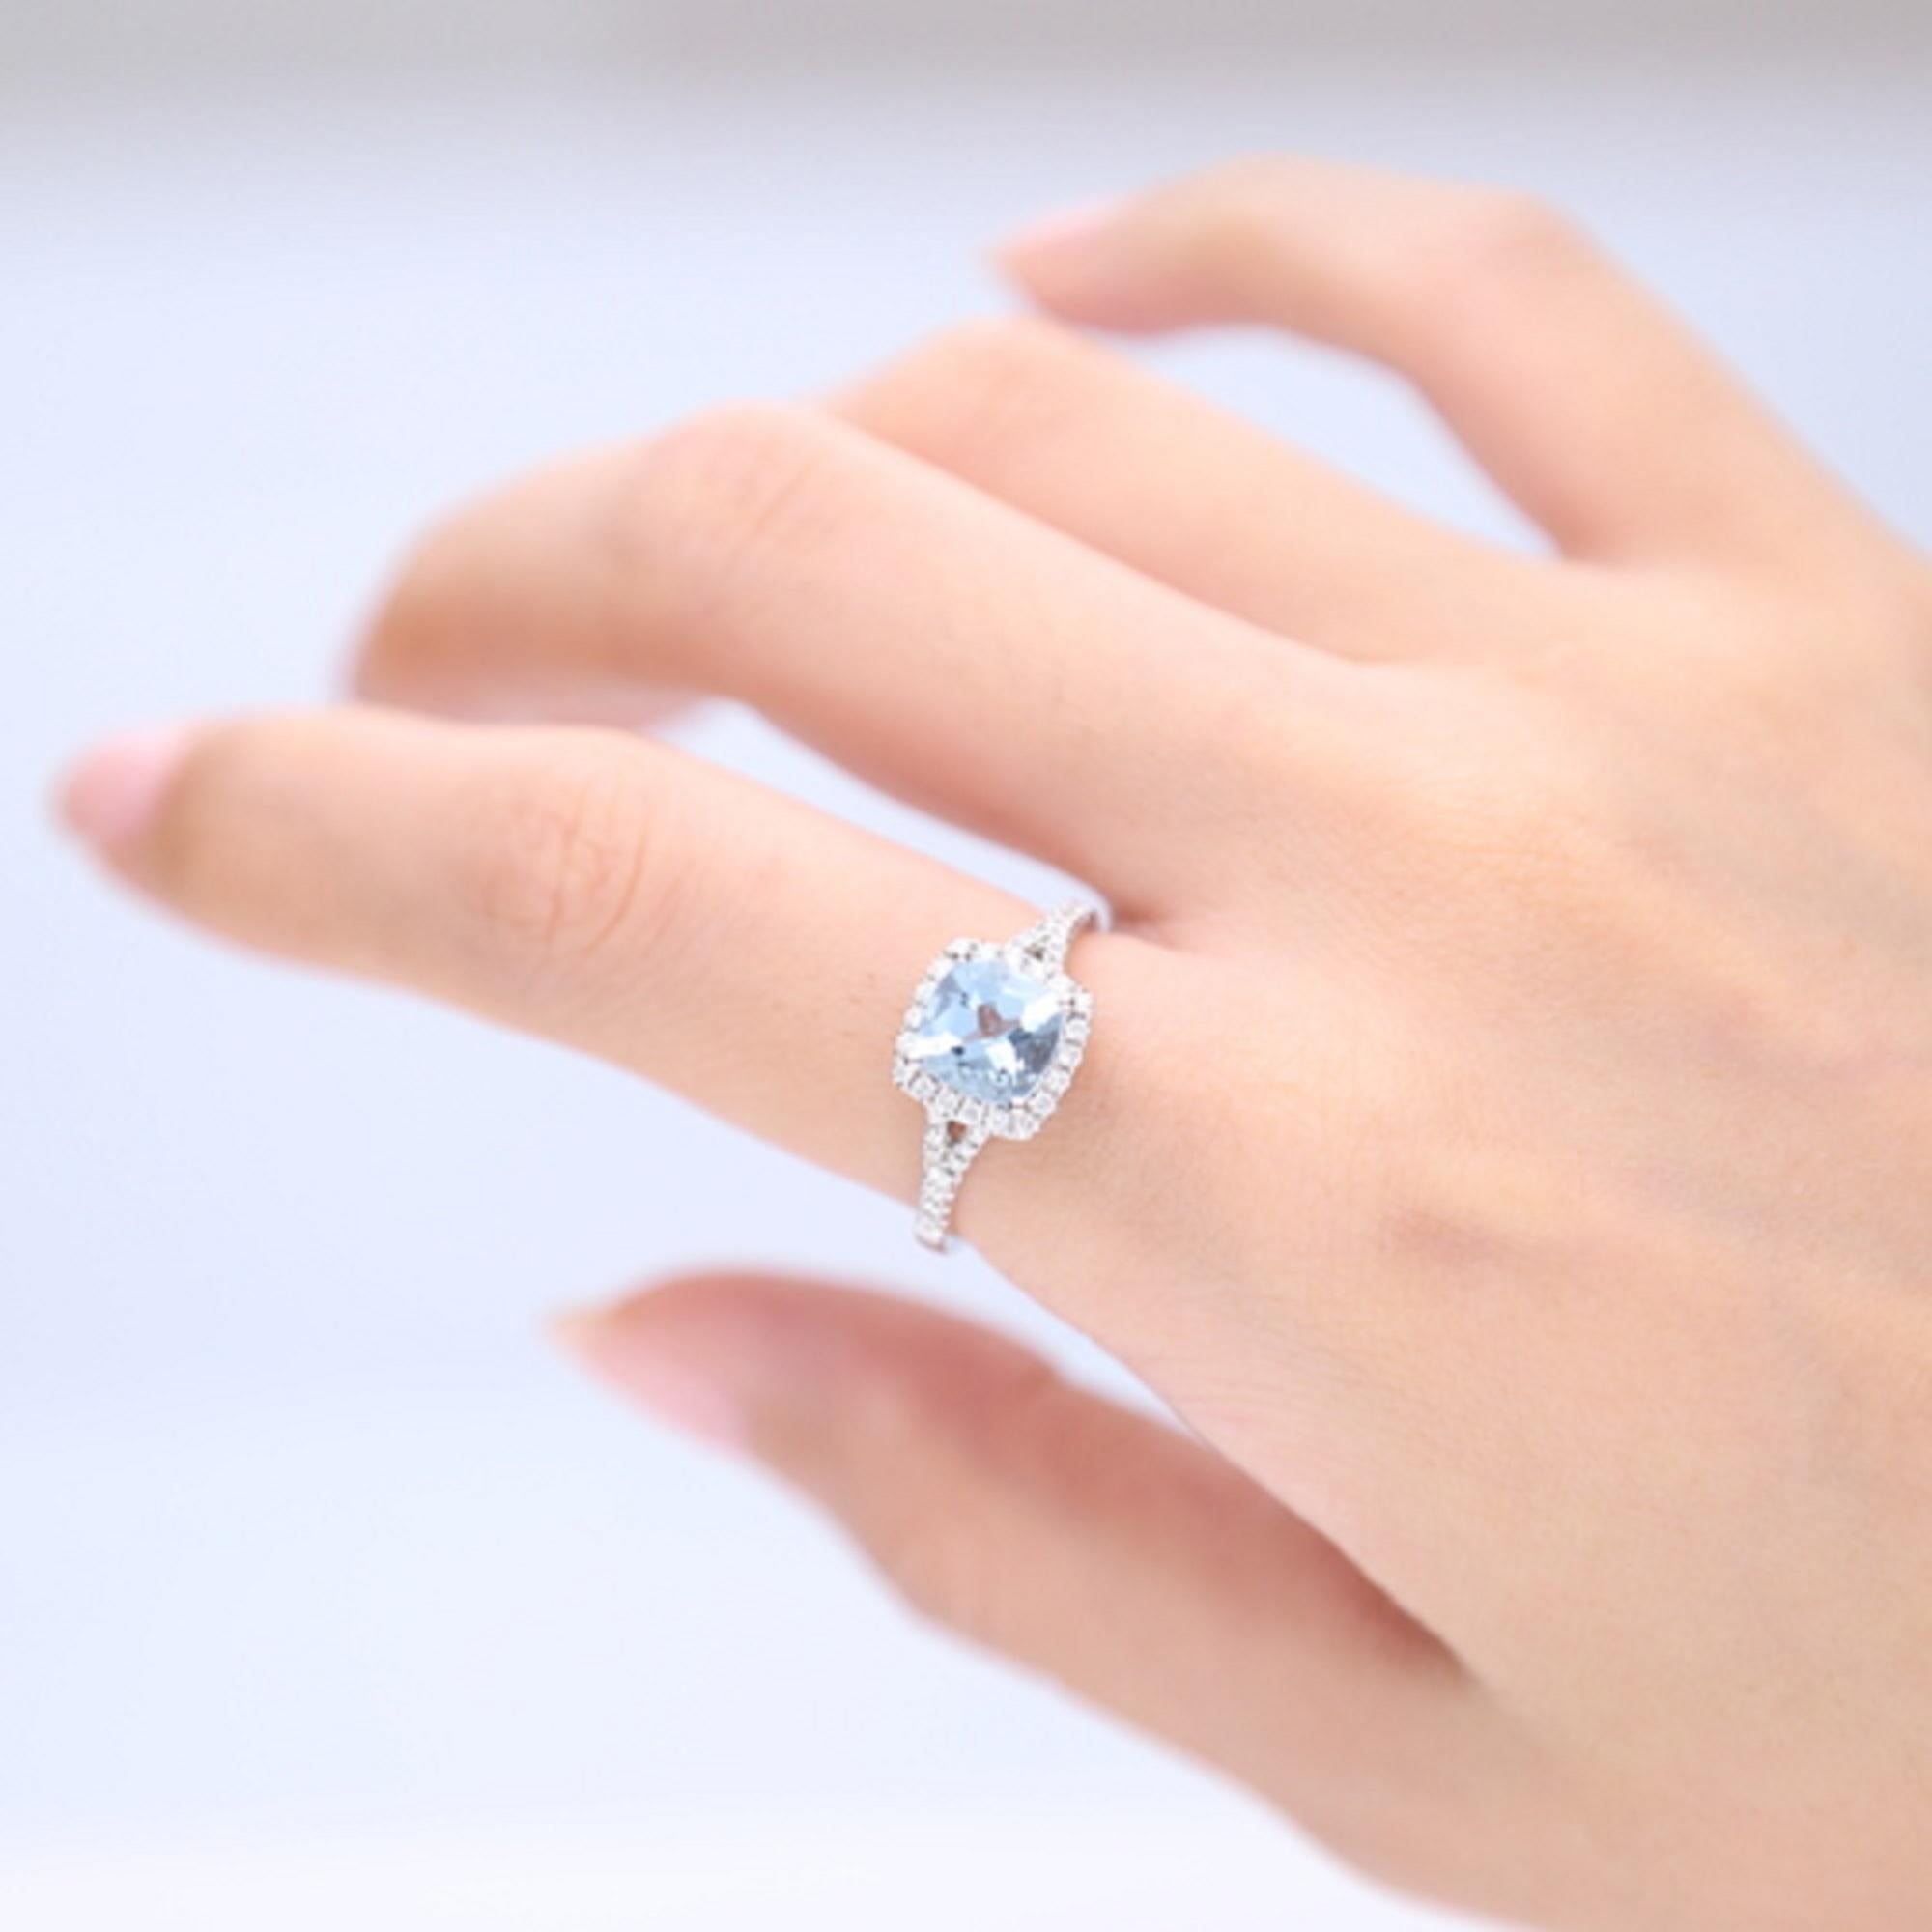 Stunning, timeless and classy eternity Unique Ring. Decorate yourself in luxury with this Gin & Grace Ring. The 14k White Gold jewelry boasts Cushion cut Prong Setting Genuine Aquamarine (1 pcs) 1.47 Carat, along with Natural Round cut white Diamond